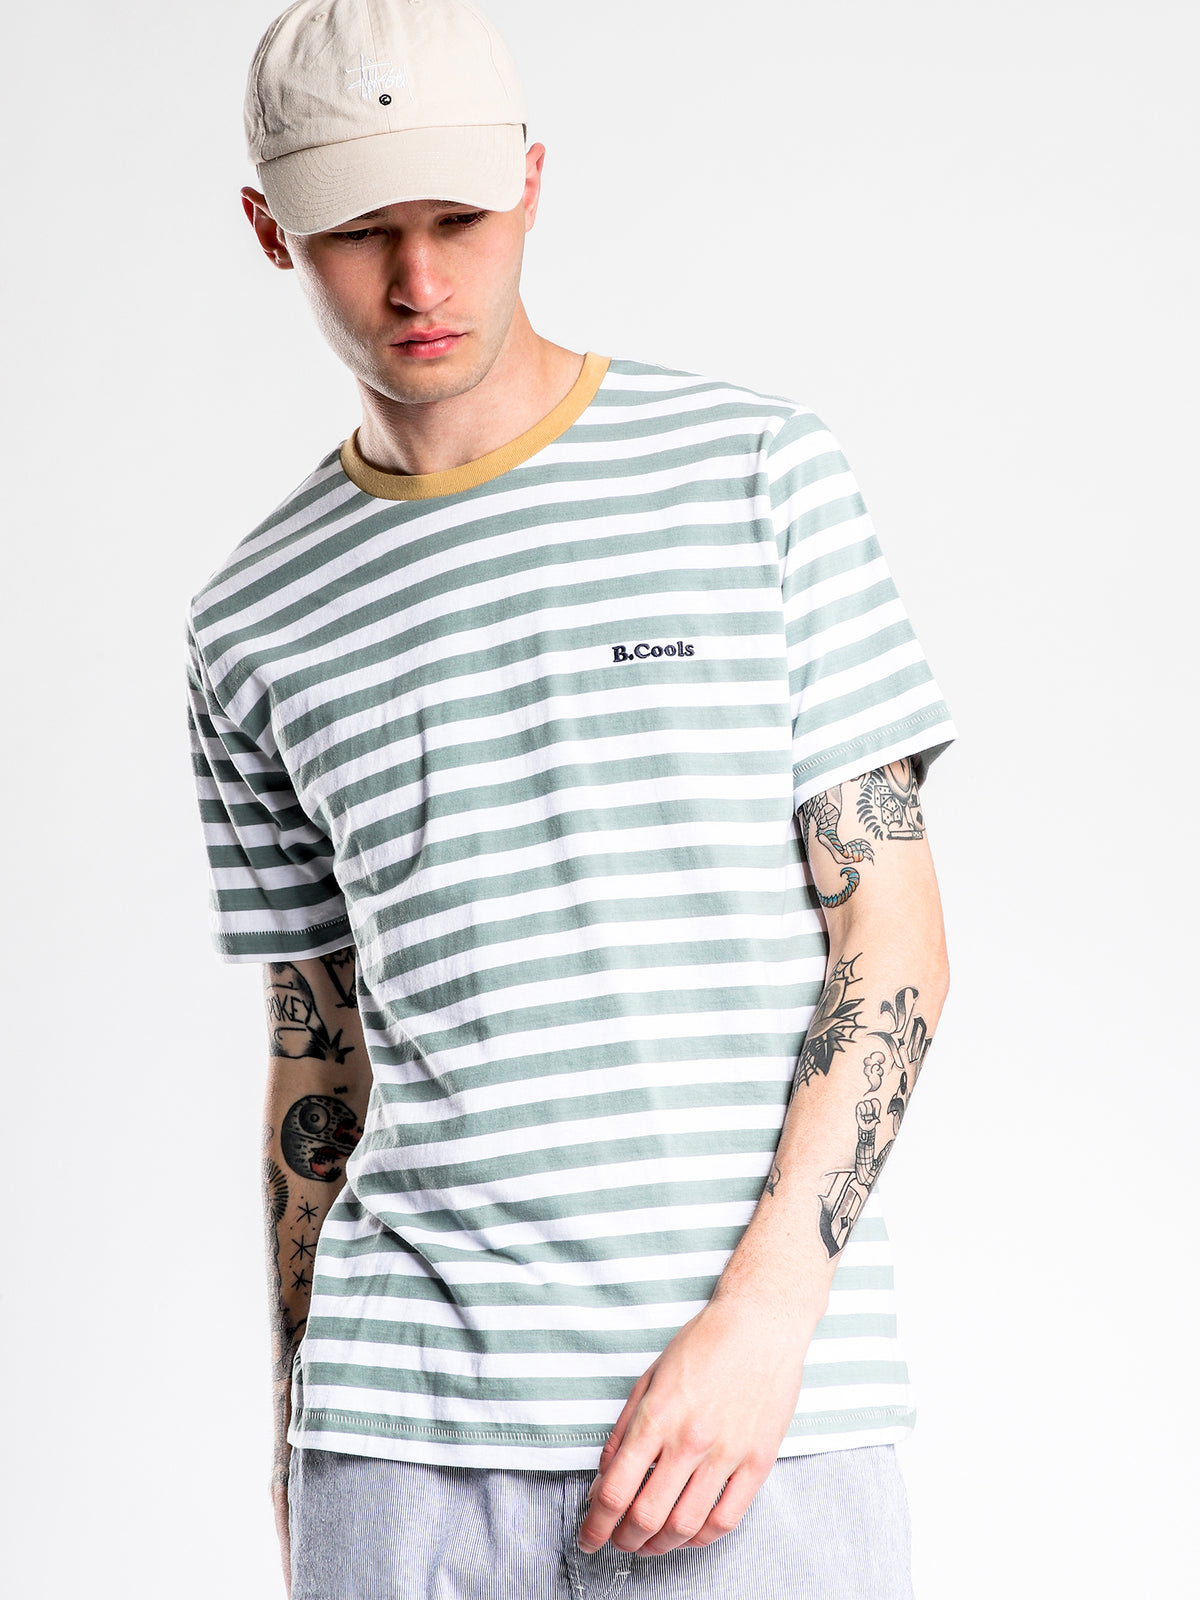 B Cools Retro T-Shirt in Teal &amp; White Stripe